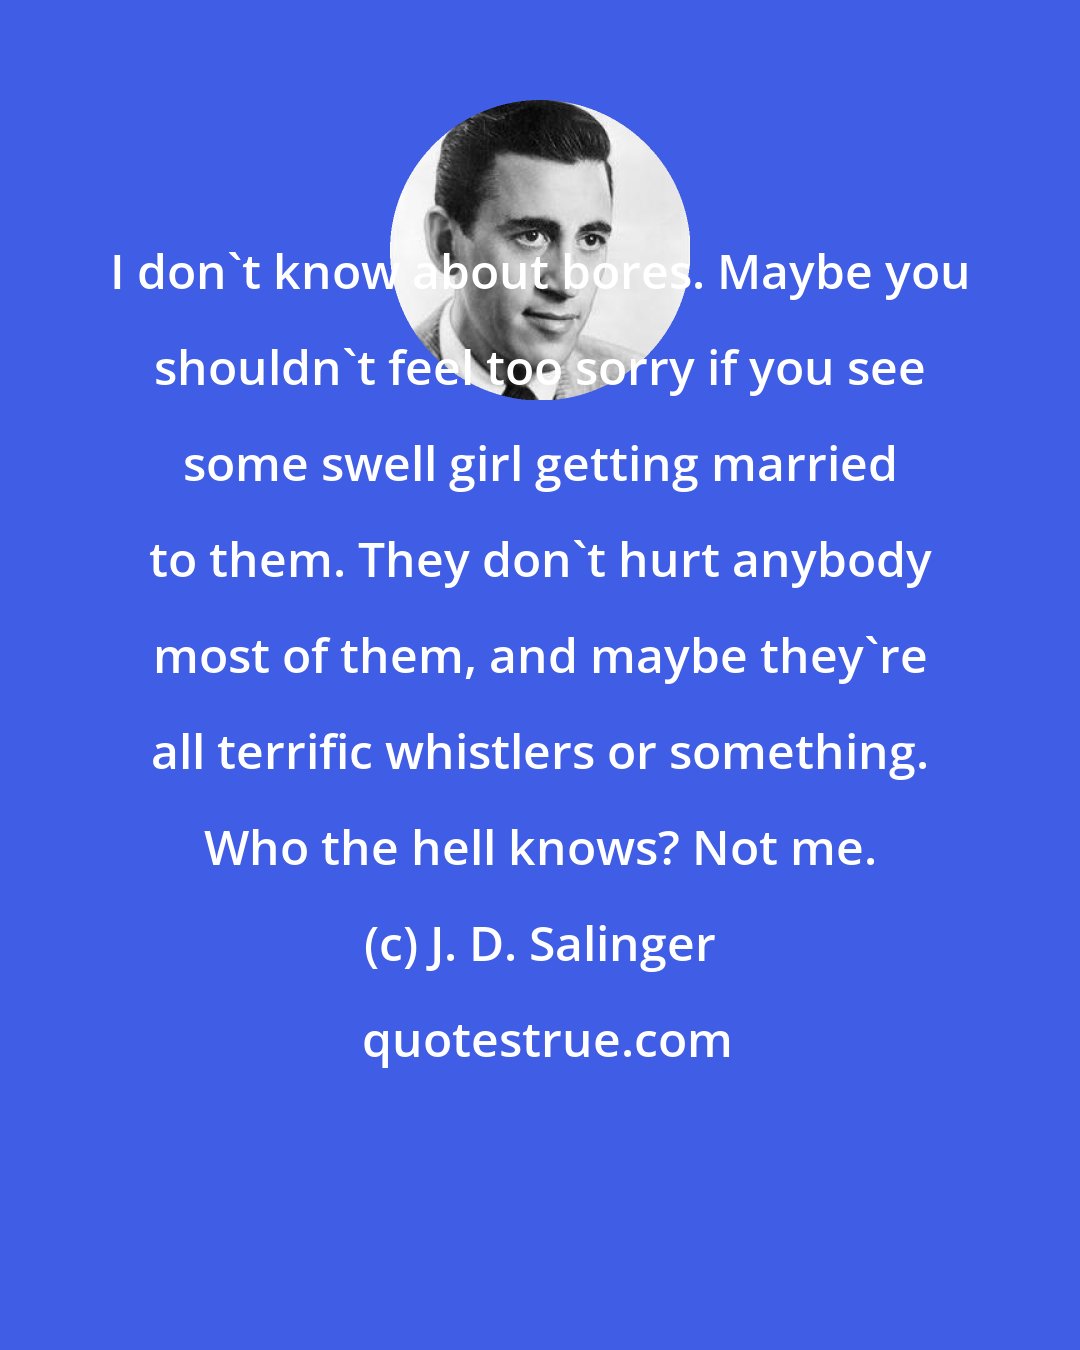 J. D. Salinger: I don't know about bores. Maybe you shouldn't feel too sorry if you see some swell girl getting married to them. They don't hurt anybody most of them, and maybe they're all terrific whistlers or something. Who the hell knows? Not me.